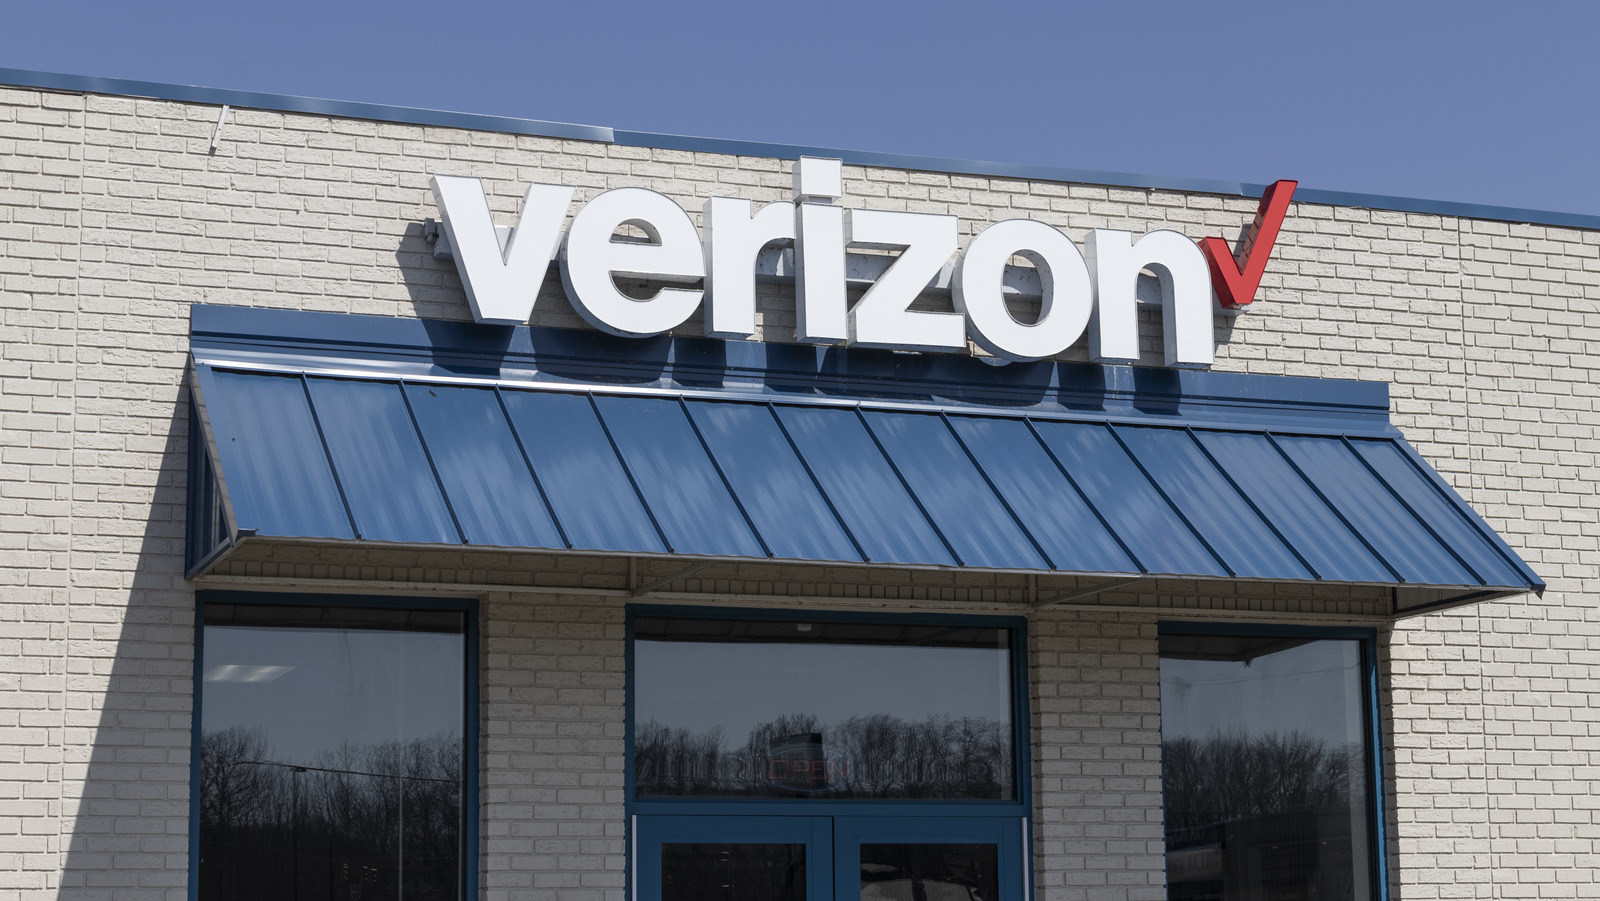 Verizon Wireless: Discounts & Perks You Should Know About